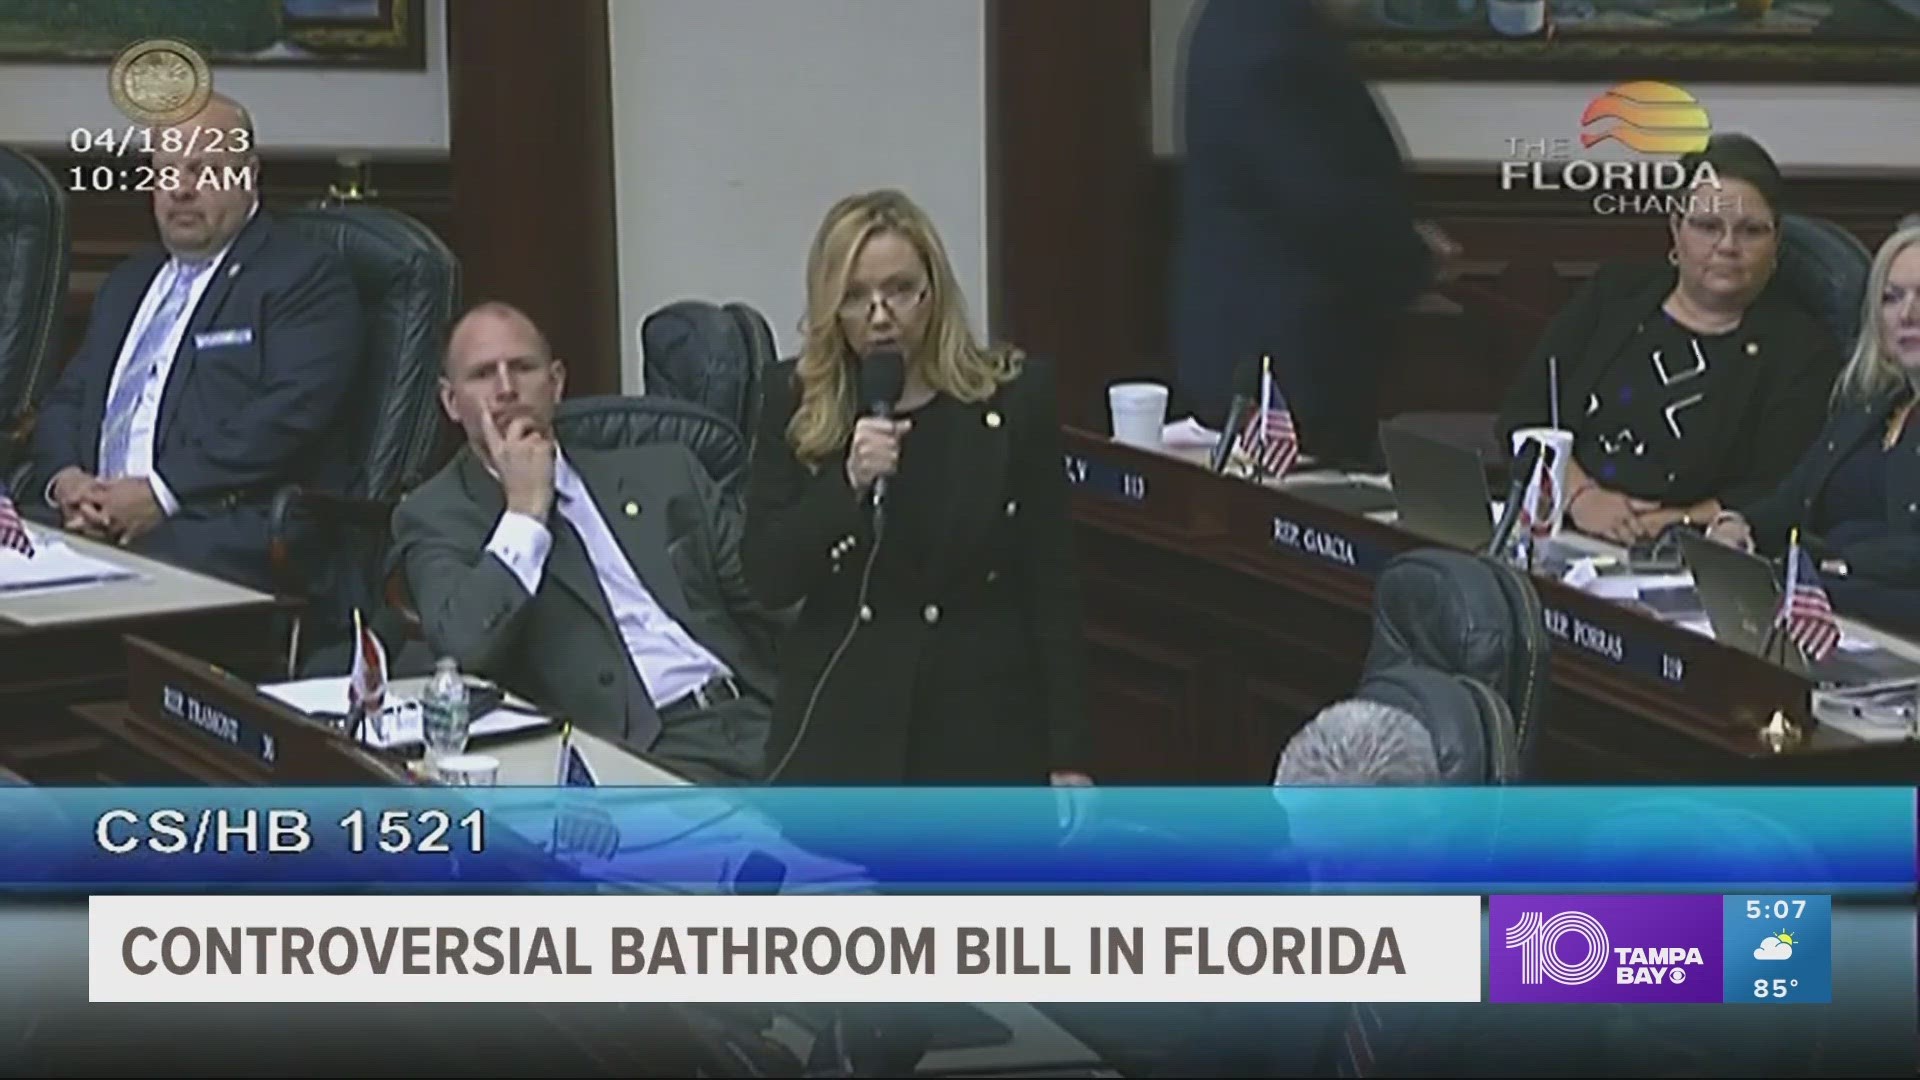 Floridians must use the bathroom of their sex assigned at birth. A misdemeanor charge for violation is possible.